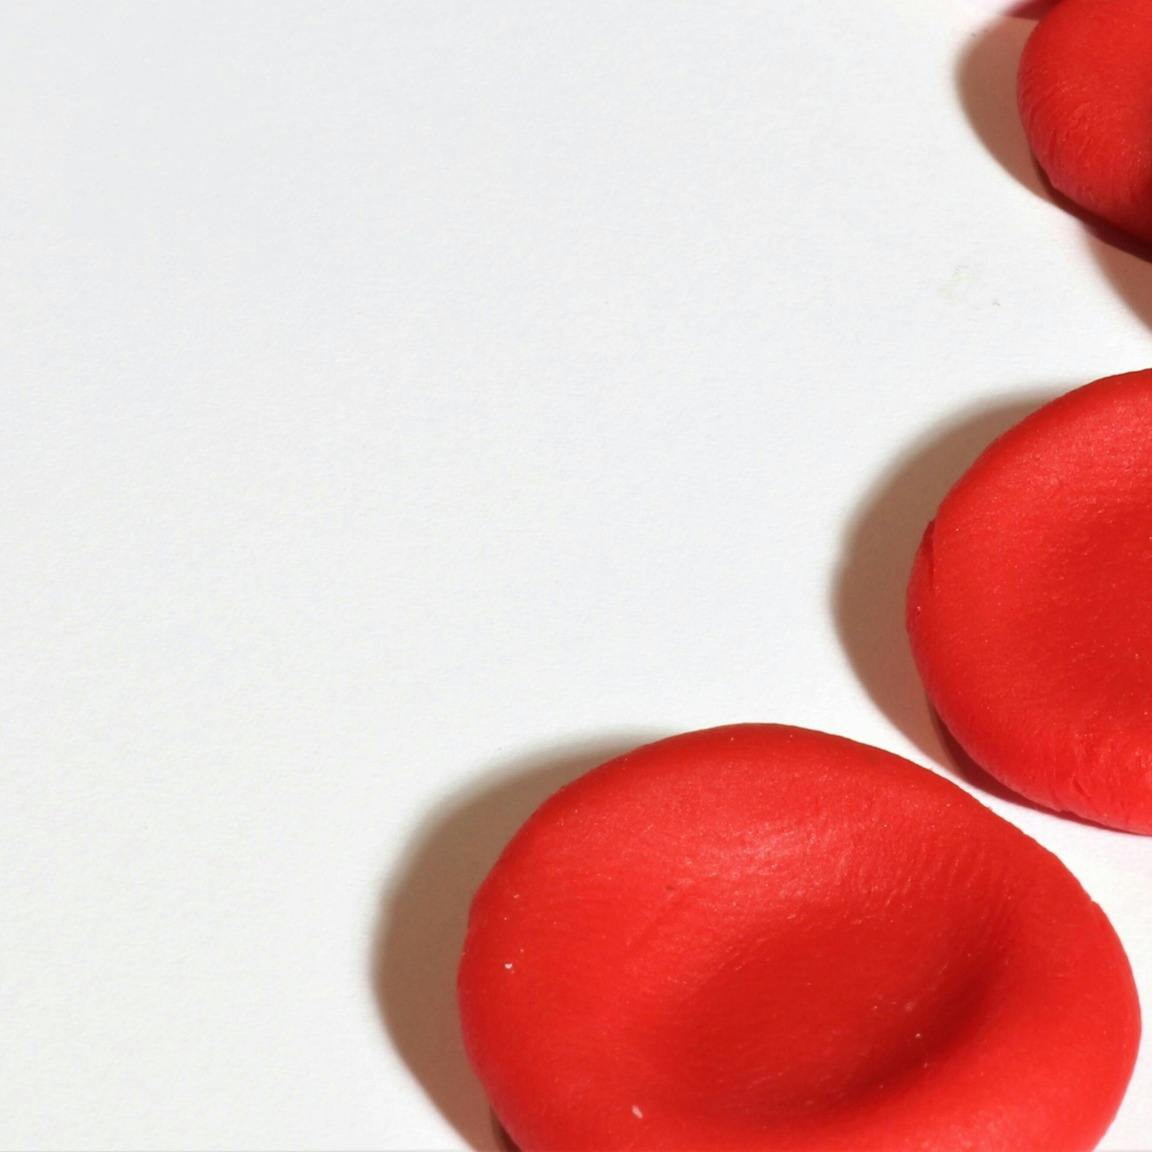 Photo of a pile of red blood cells made out of clay or similar material.